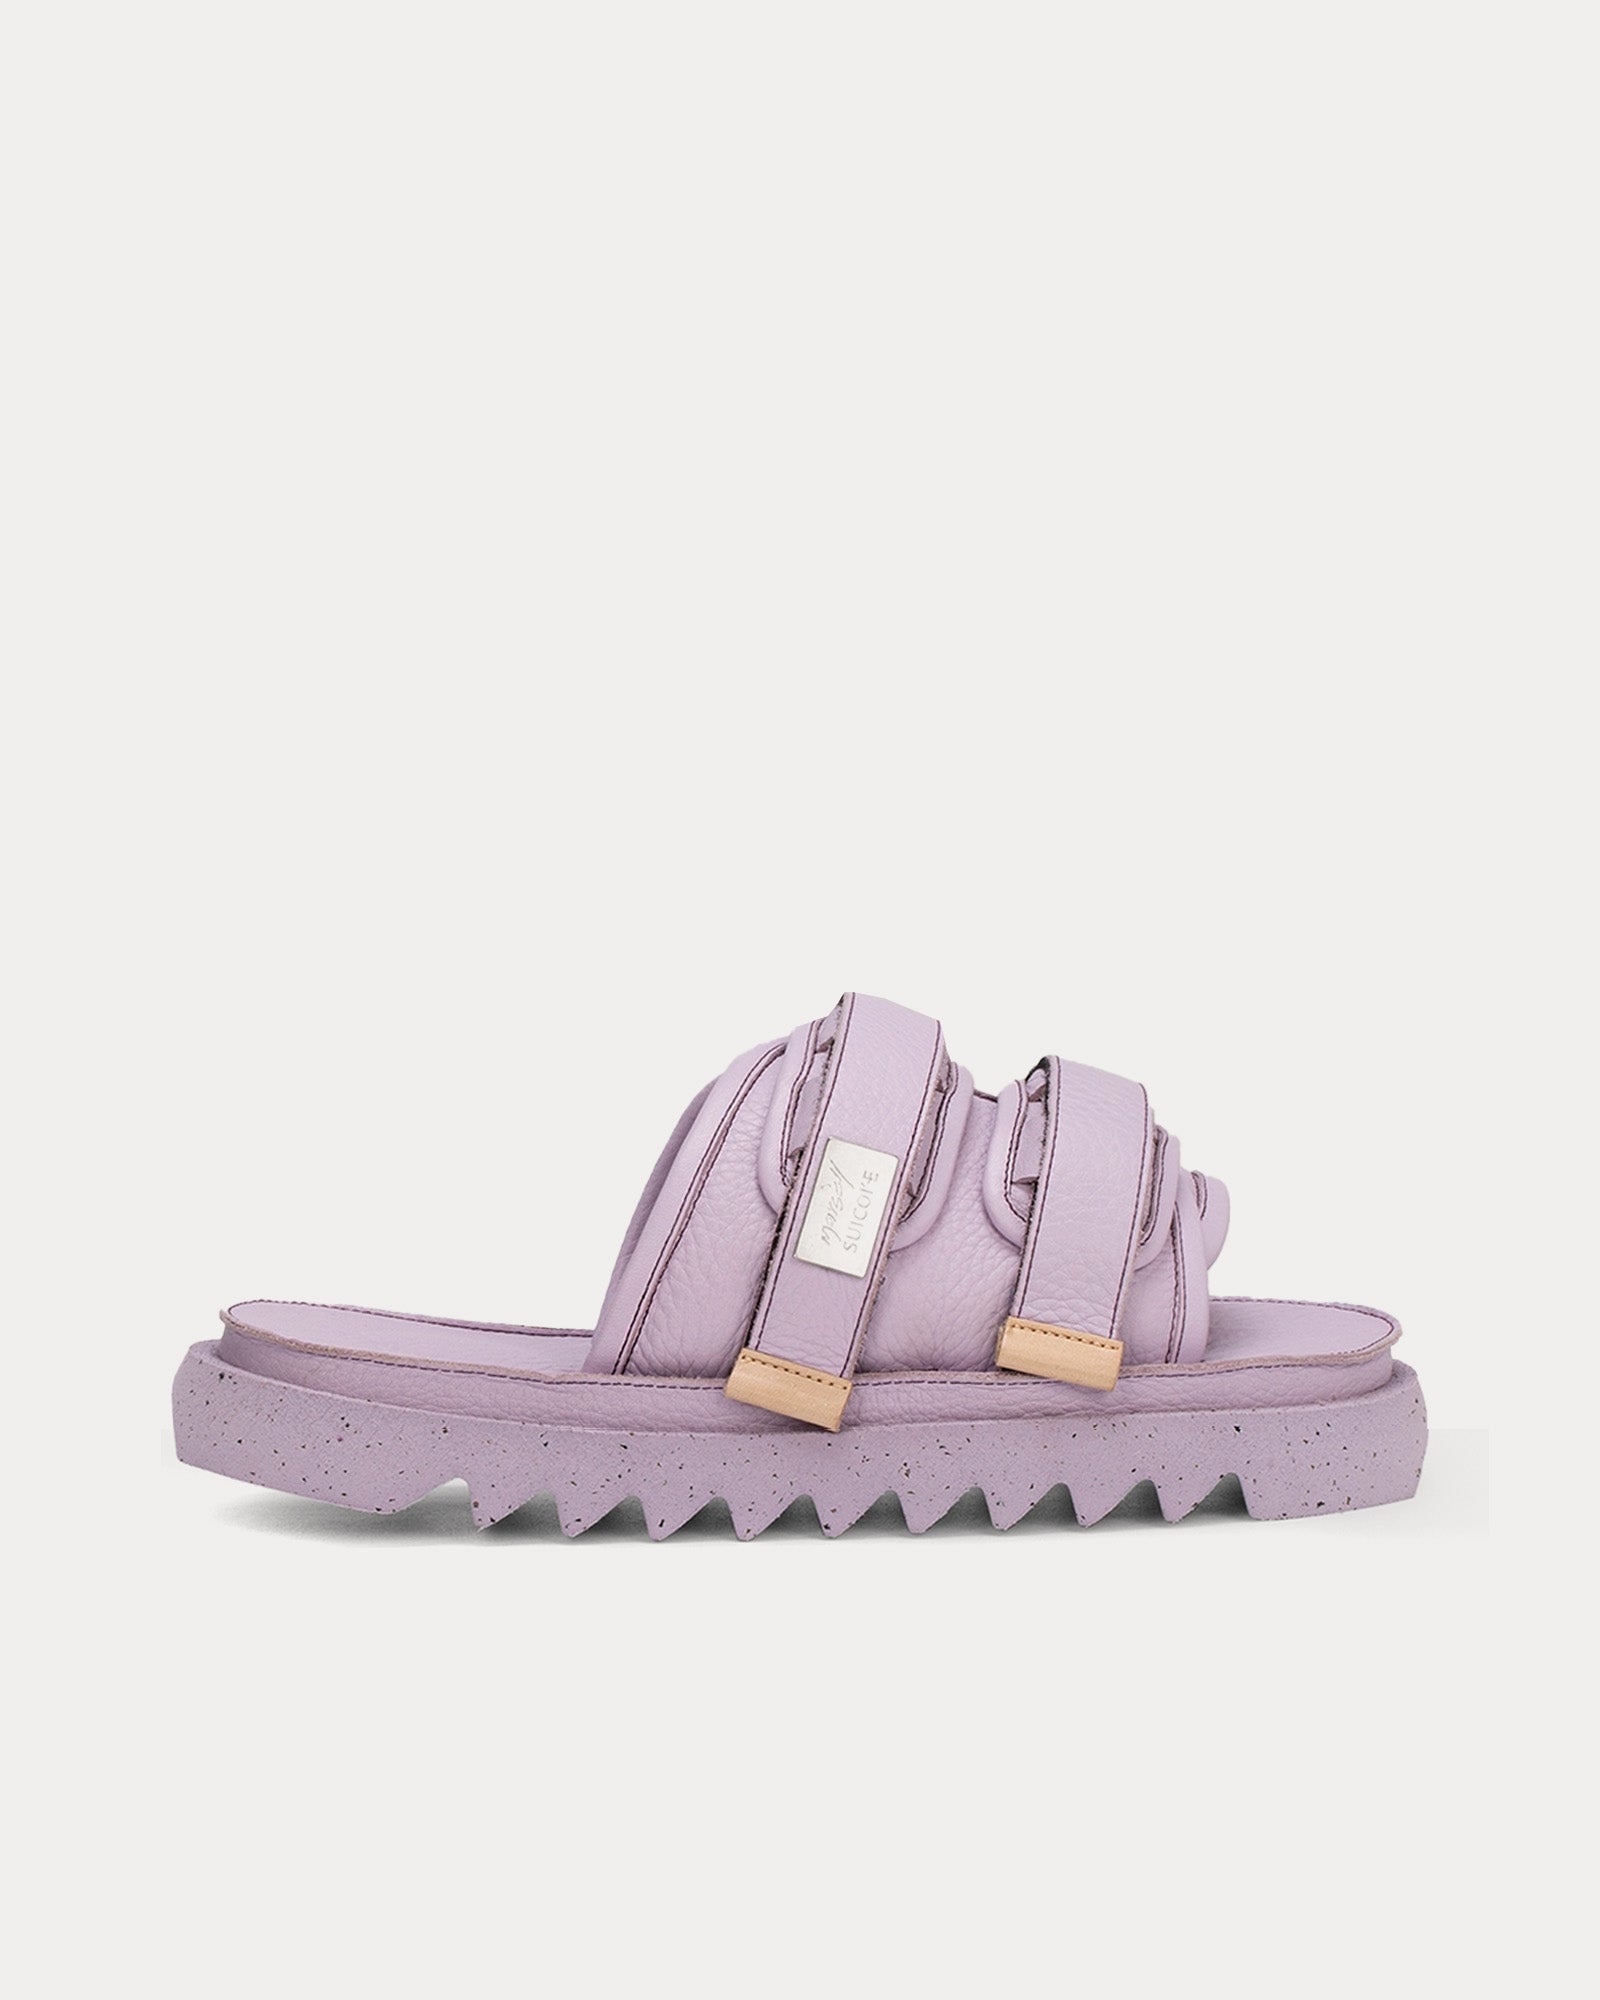 Marsell x Suicoke - Moto Leather Lilac Sandals